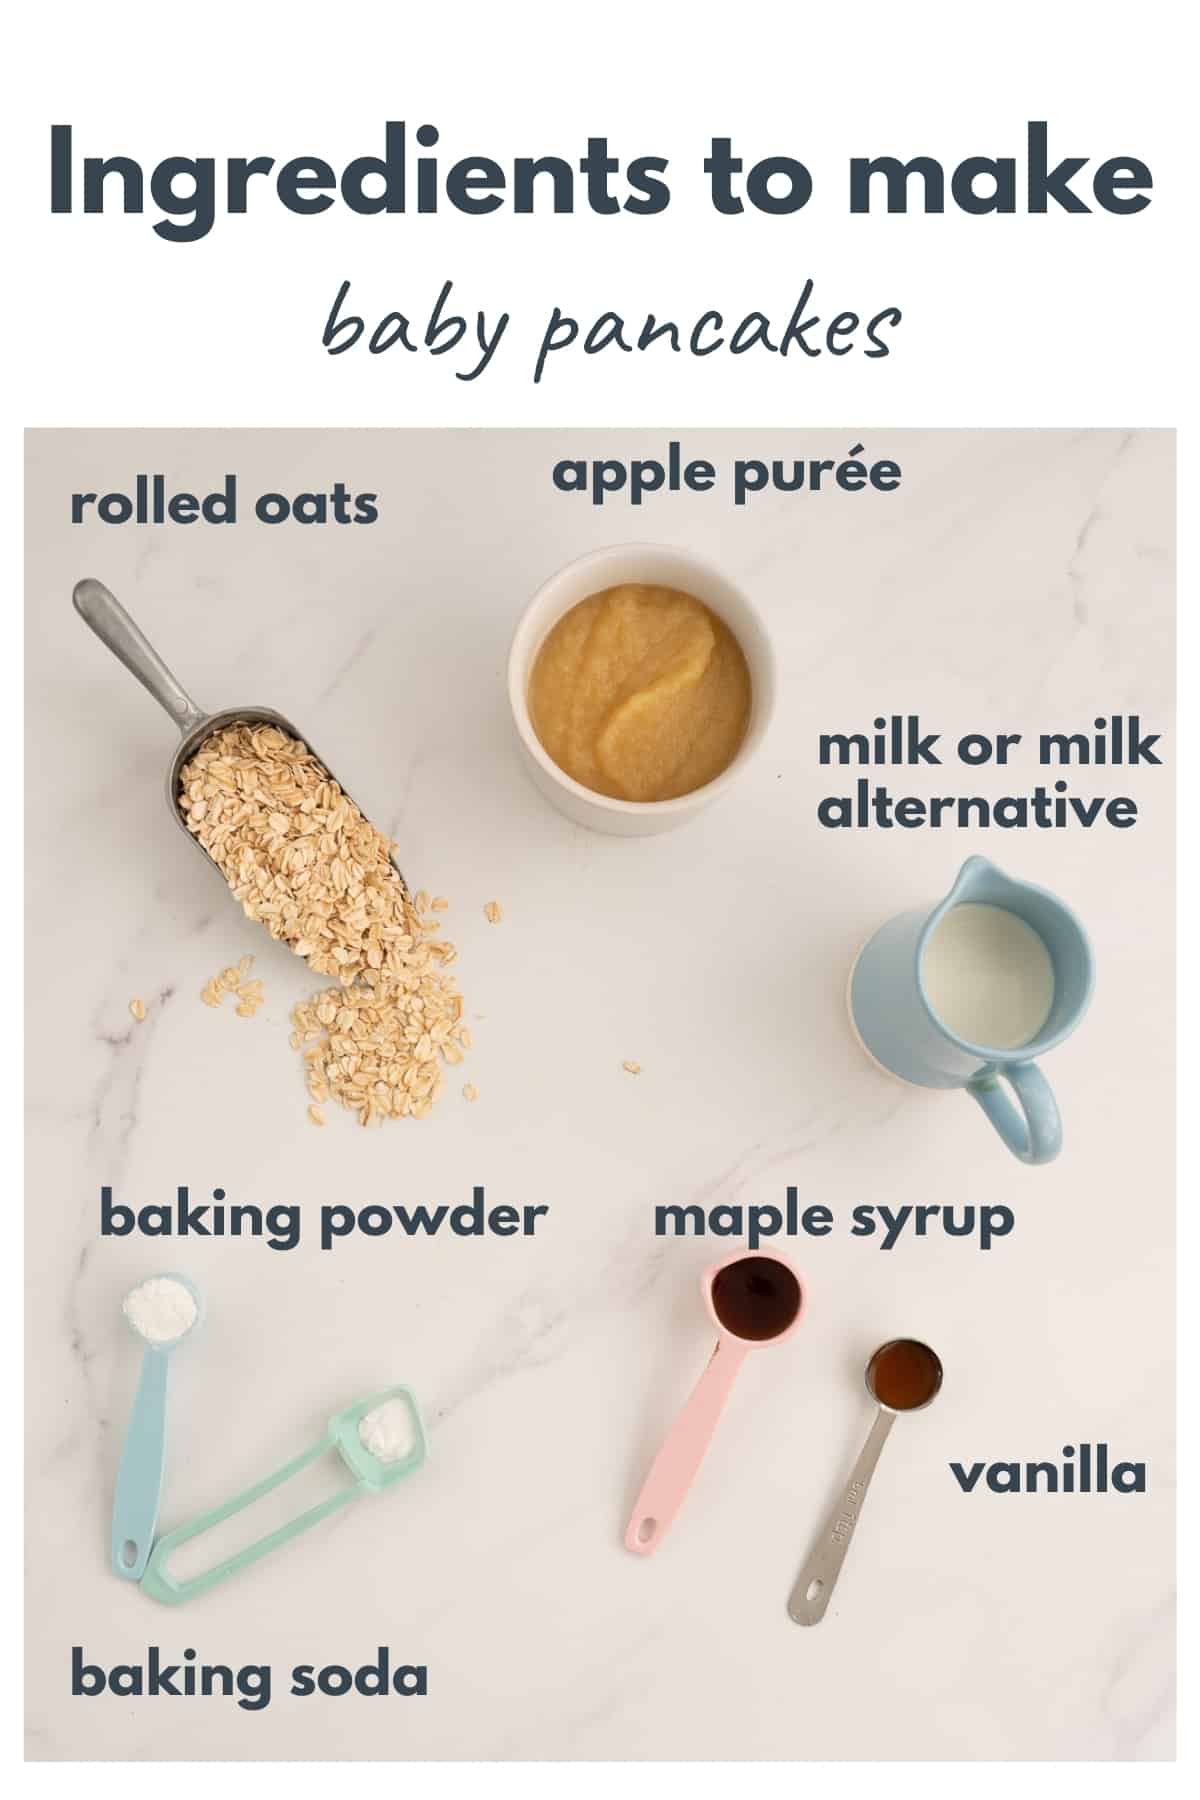 Ingredients for apple oat baby pancakes laid out on a bench top with text overlay.